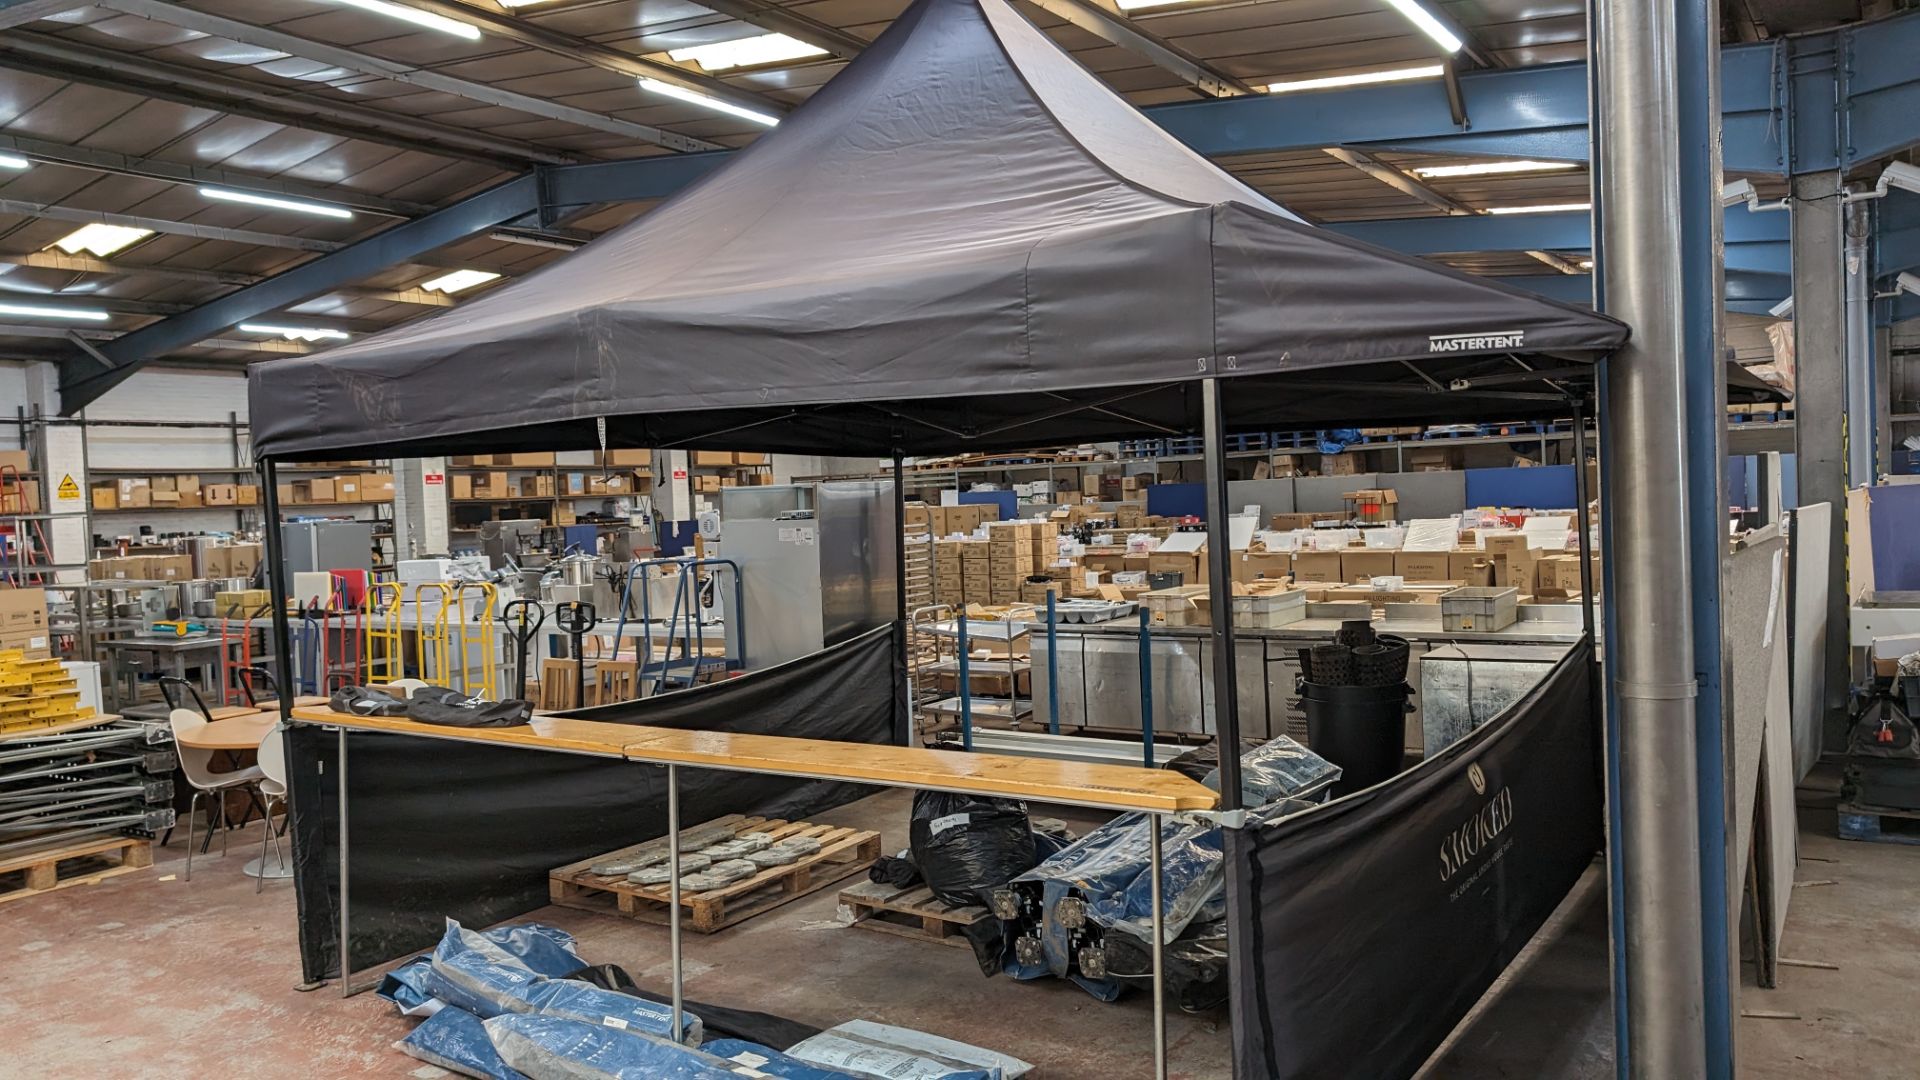 Mastertent 4m x 4m canopy tent (gazebo), bought new in May 2022 for approximately £3,600. This item - Image 2 of 14